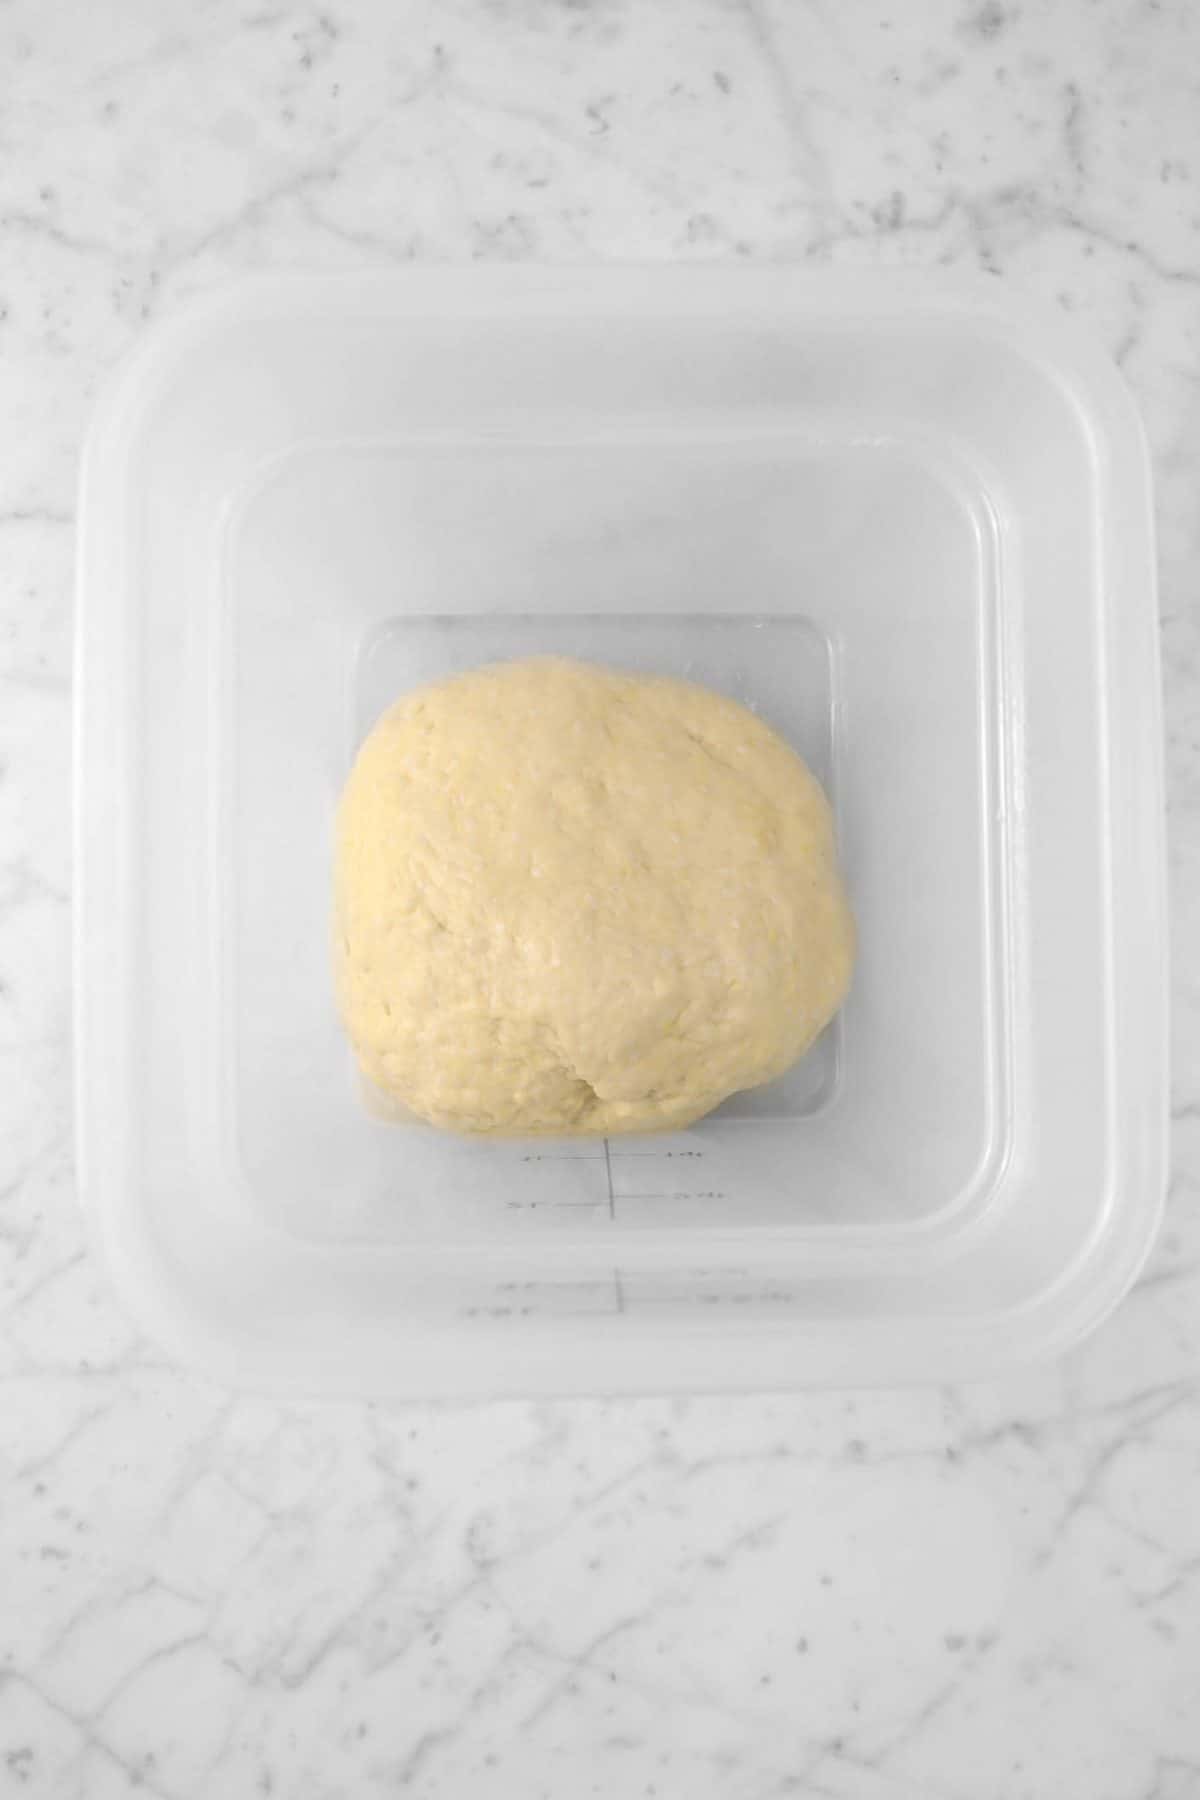 dough in a plastic container